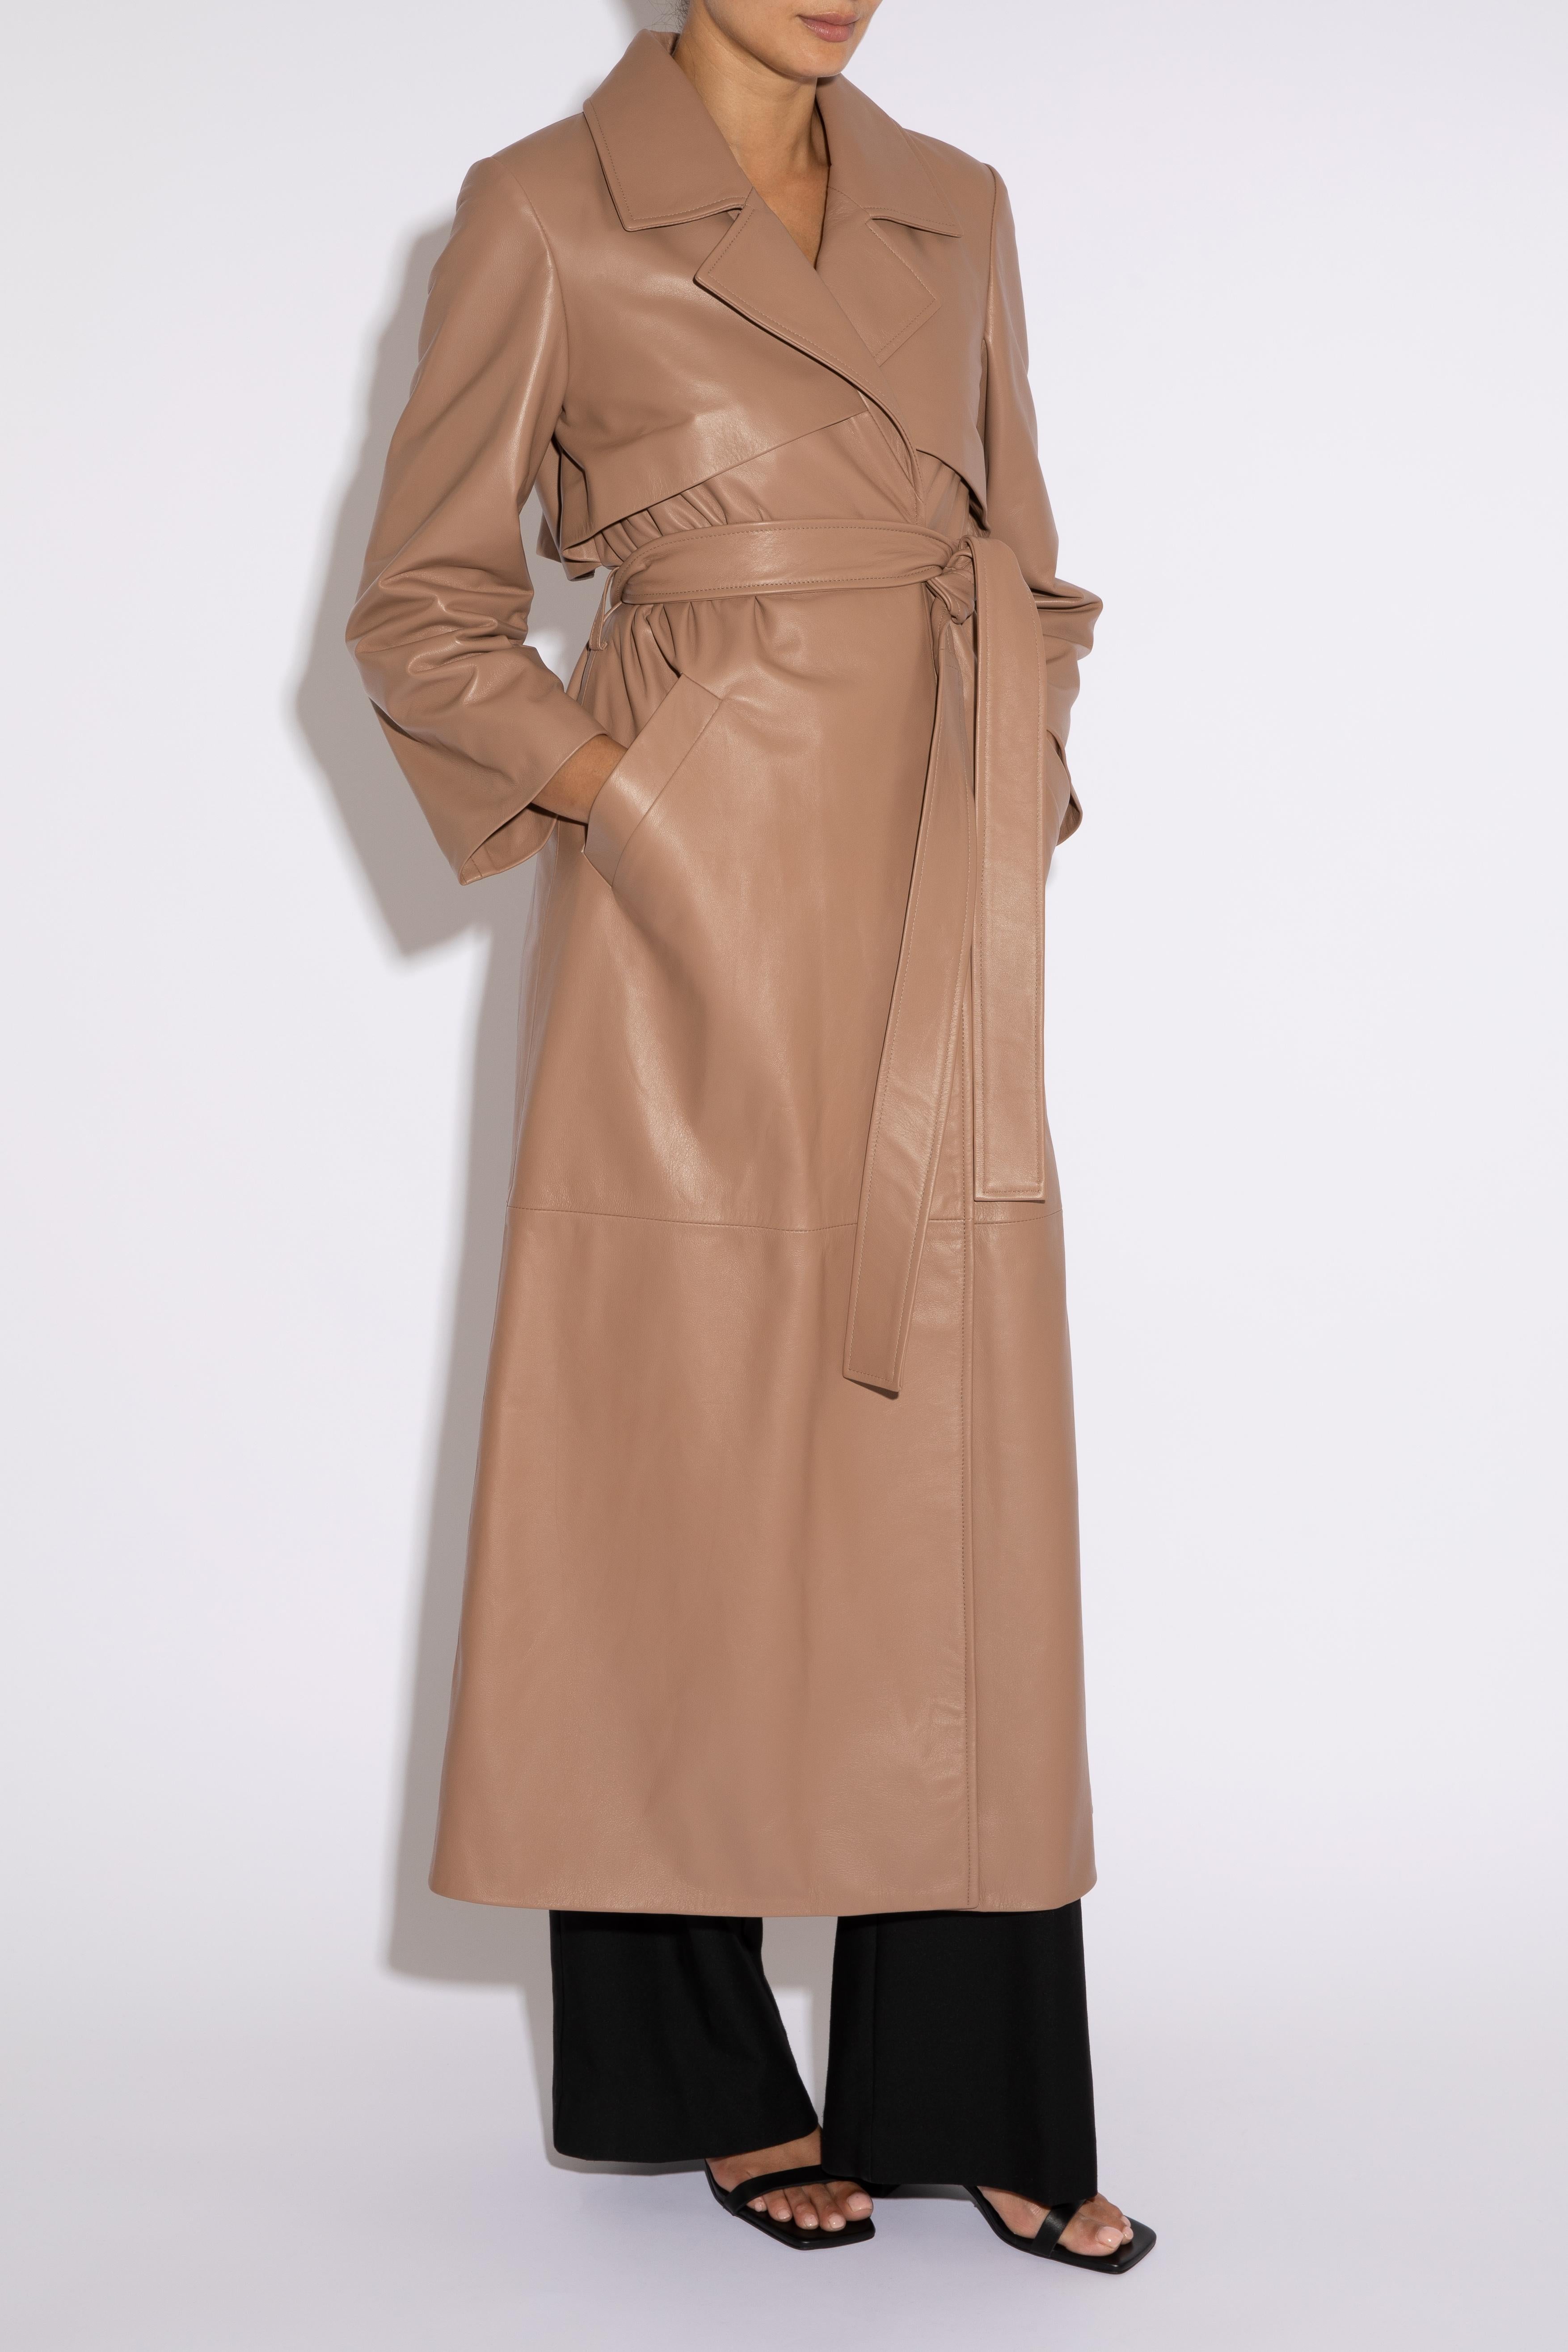 Verheyen London Leather Trench Coat in Taupe Brown - Size uk 8 For Sale 1